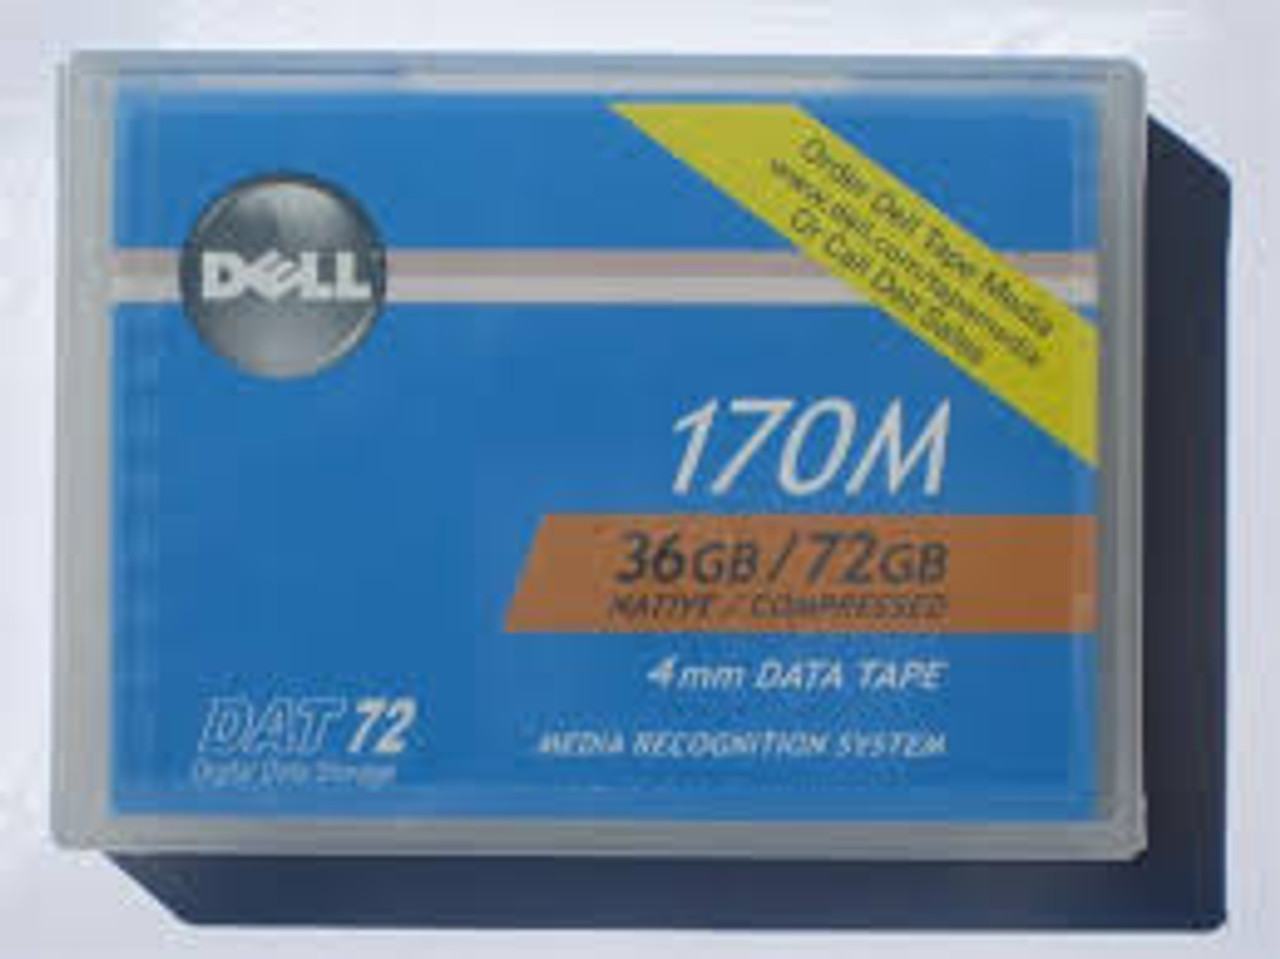 Dell 0W3552 DDS-5 36/72GB Backup Tape -  Pack